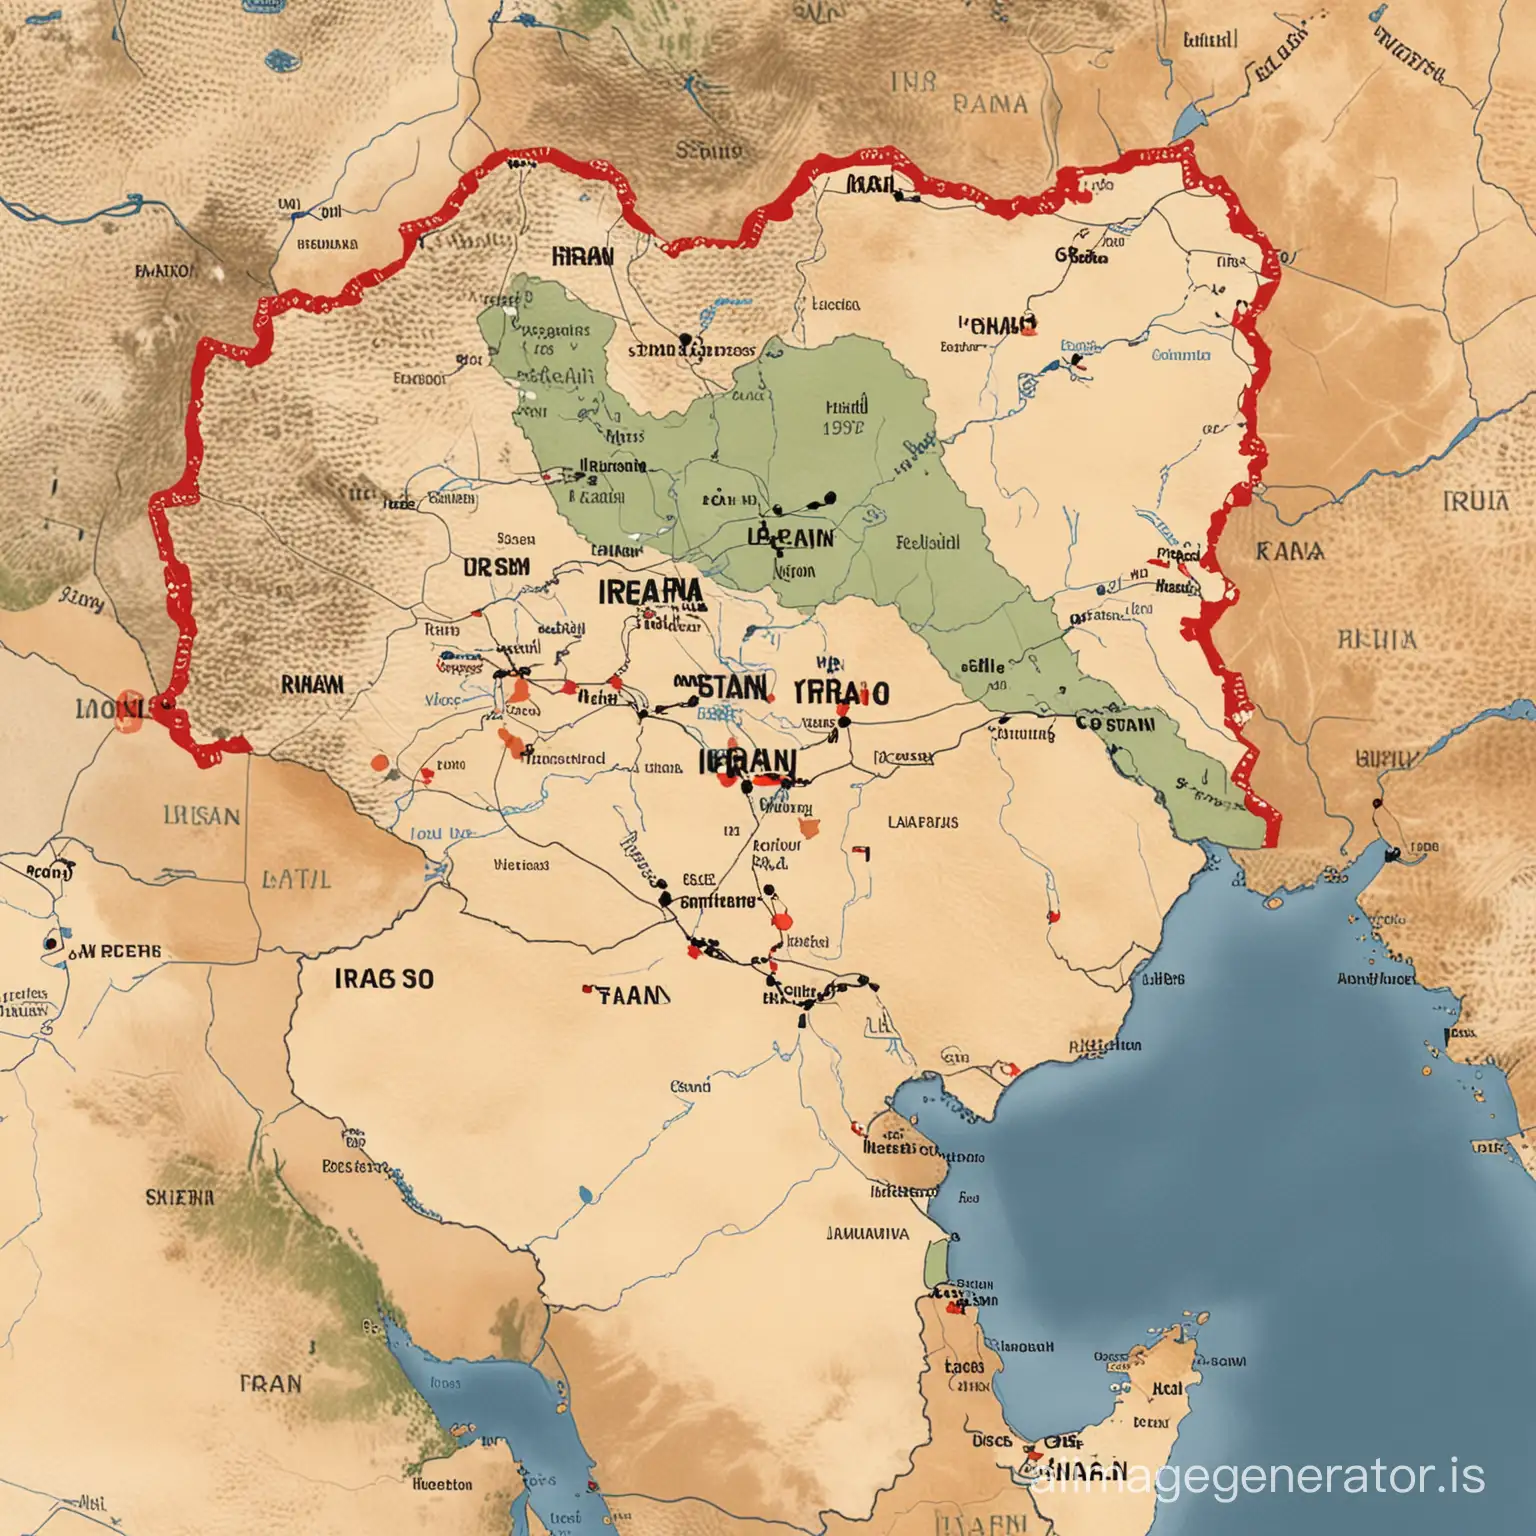 A map showing the region of Iran and Iraq, with markers indicating key locations of conflict during the war.